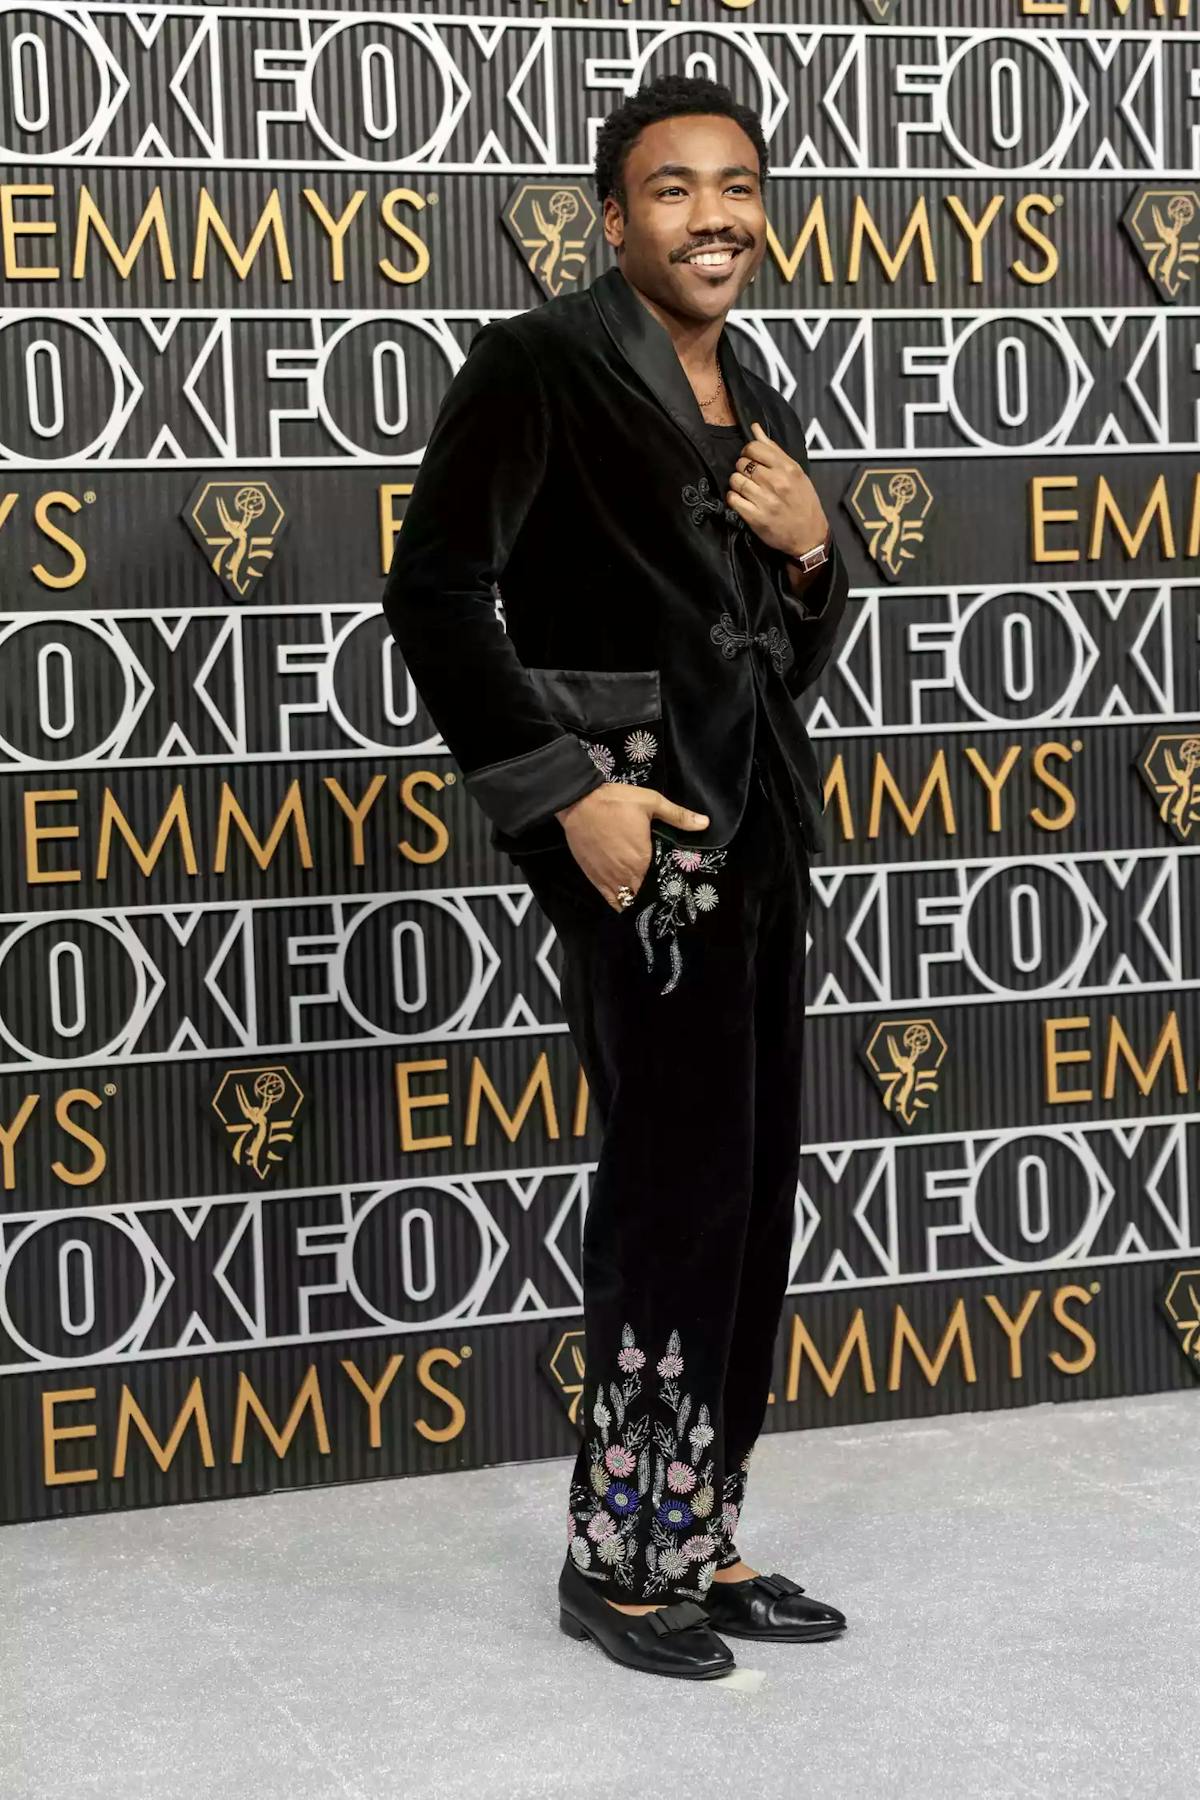 Donald Glover 2024 Emmys outfit is a black velvet tuxedo with black satin lapels, embroidered flowers, and patent ballet flats.